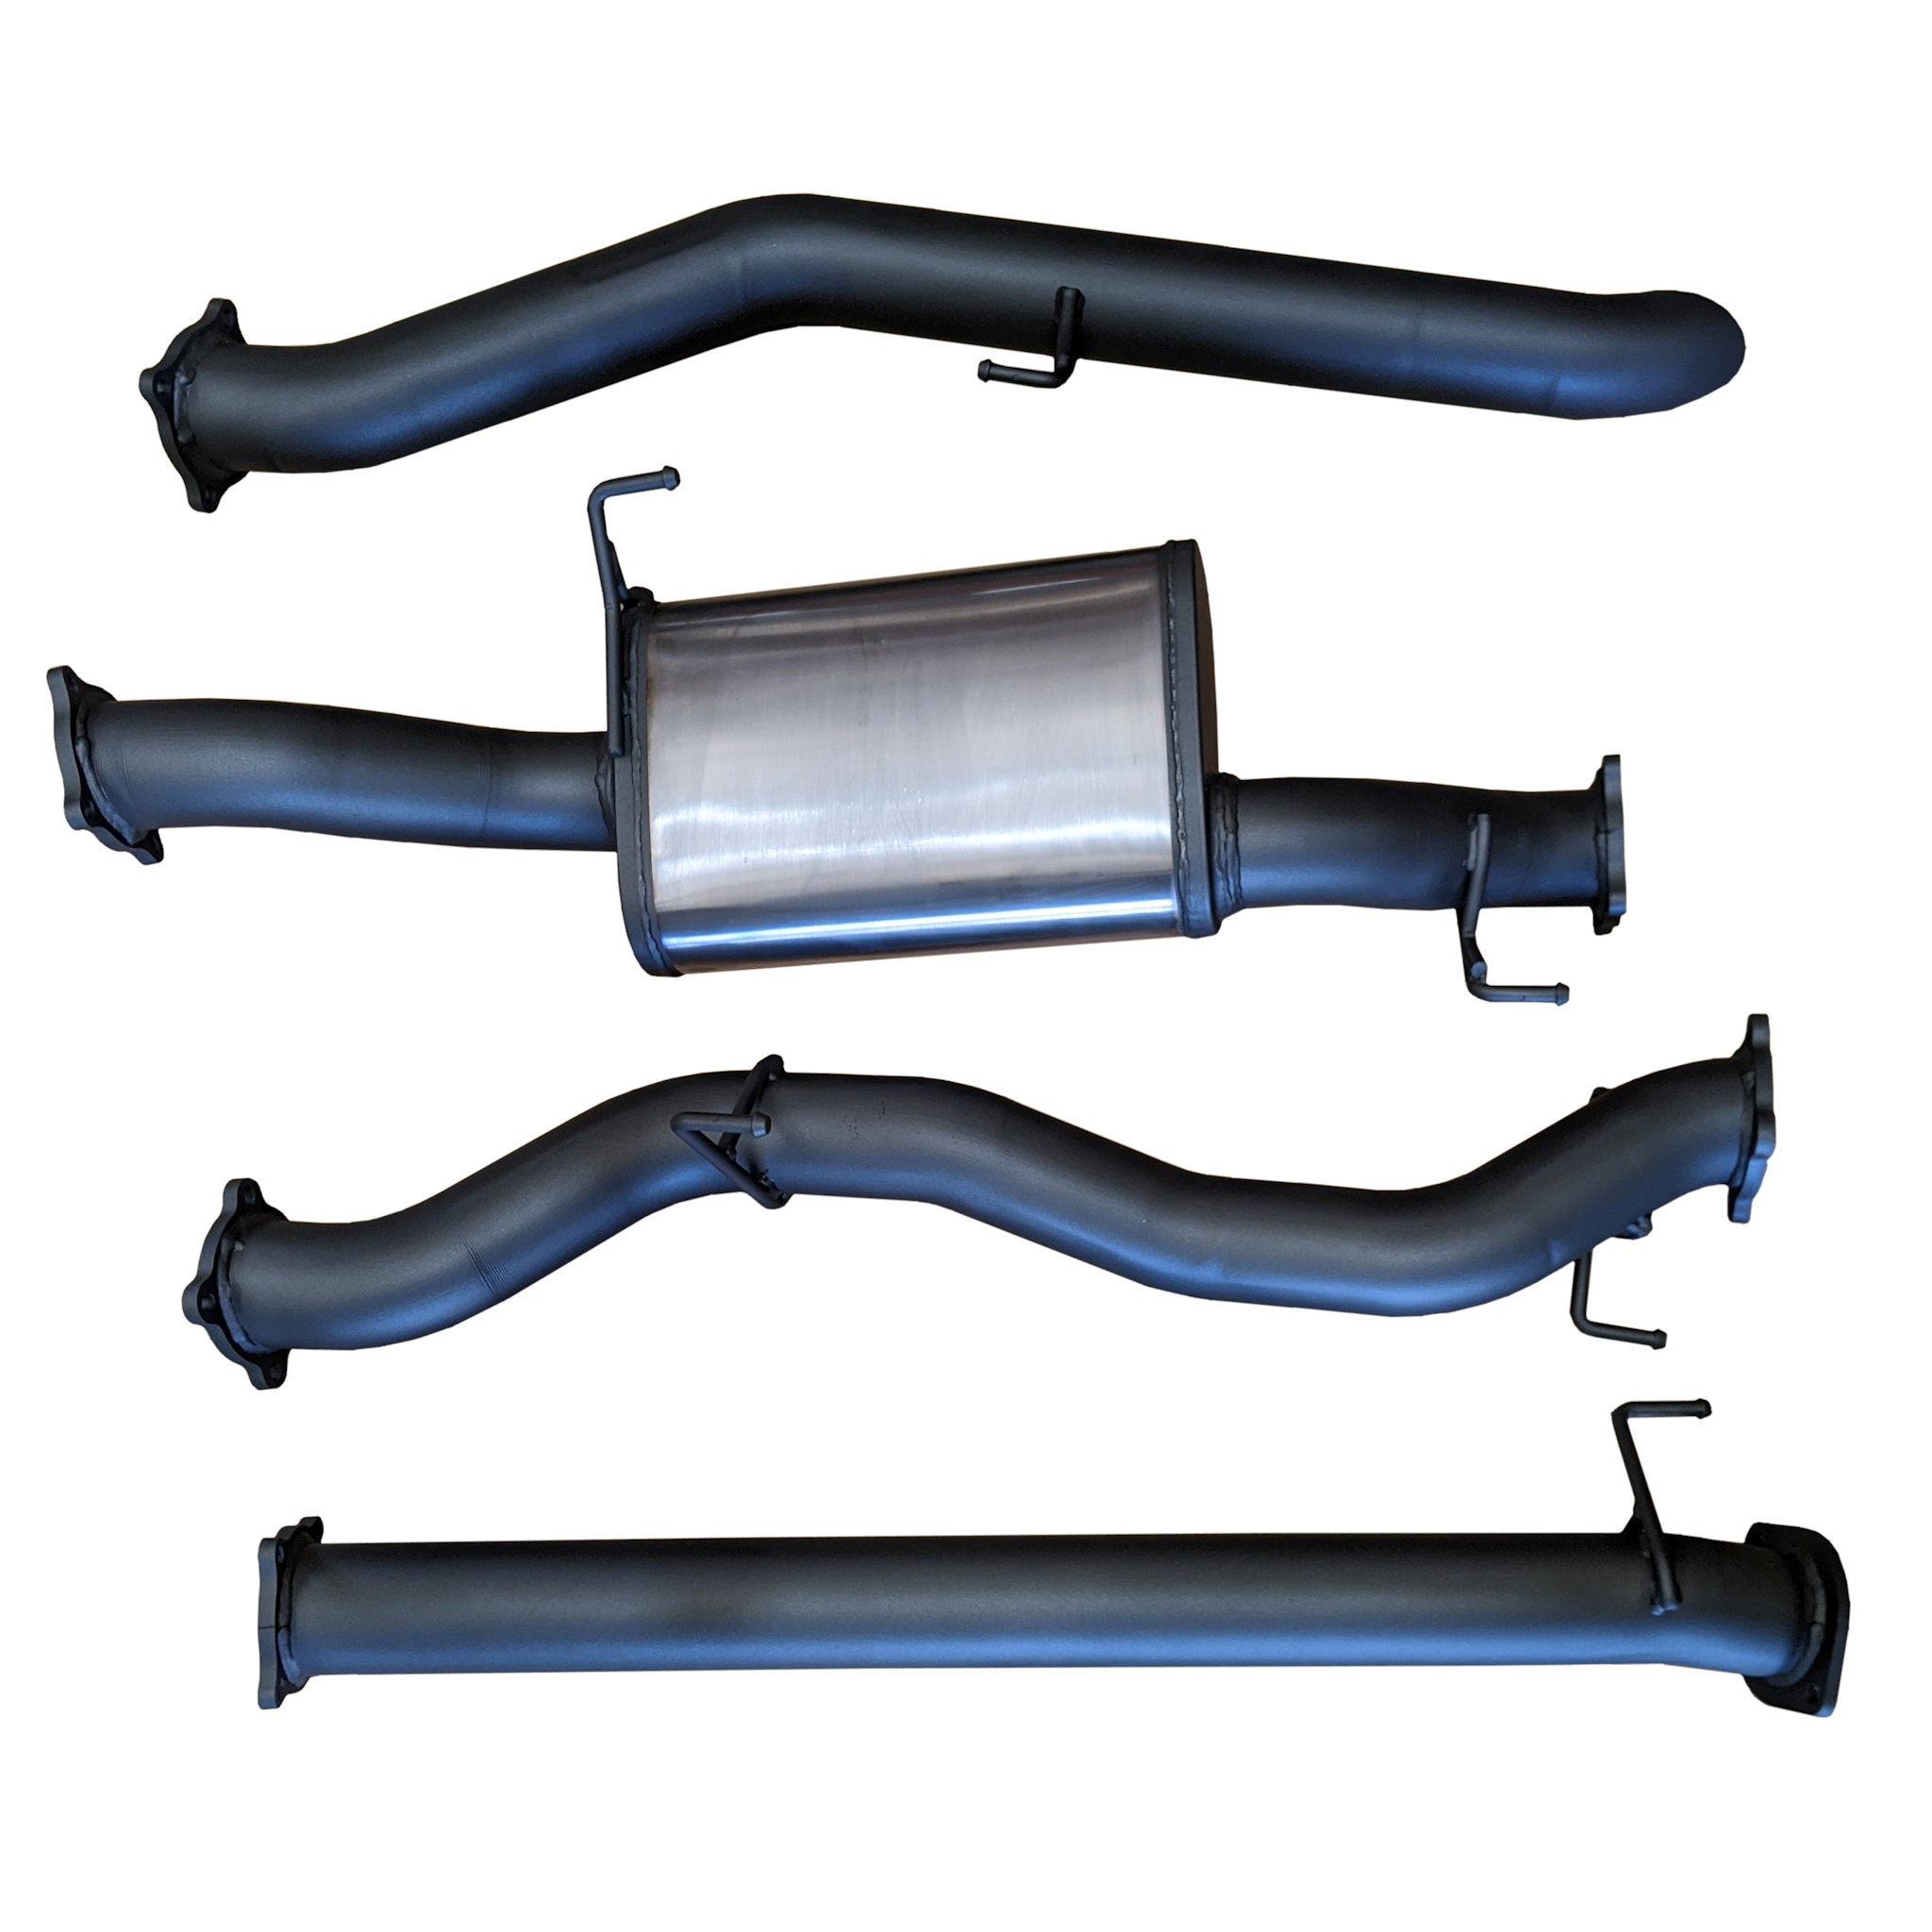 Holden Colorado RG 4wd 2.8L 4 Cylinder Turbo Diesel Ute 10/2016 - 2020 - DPF Back Exhaust System